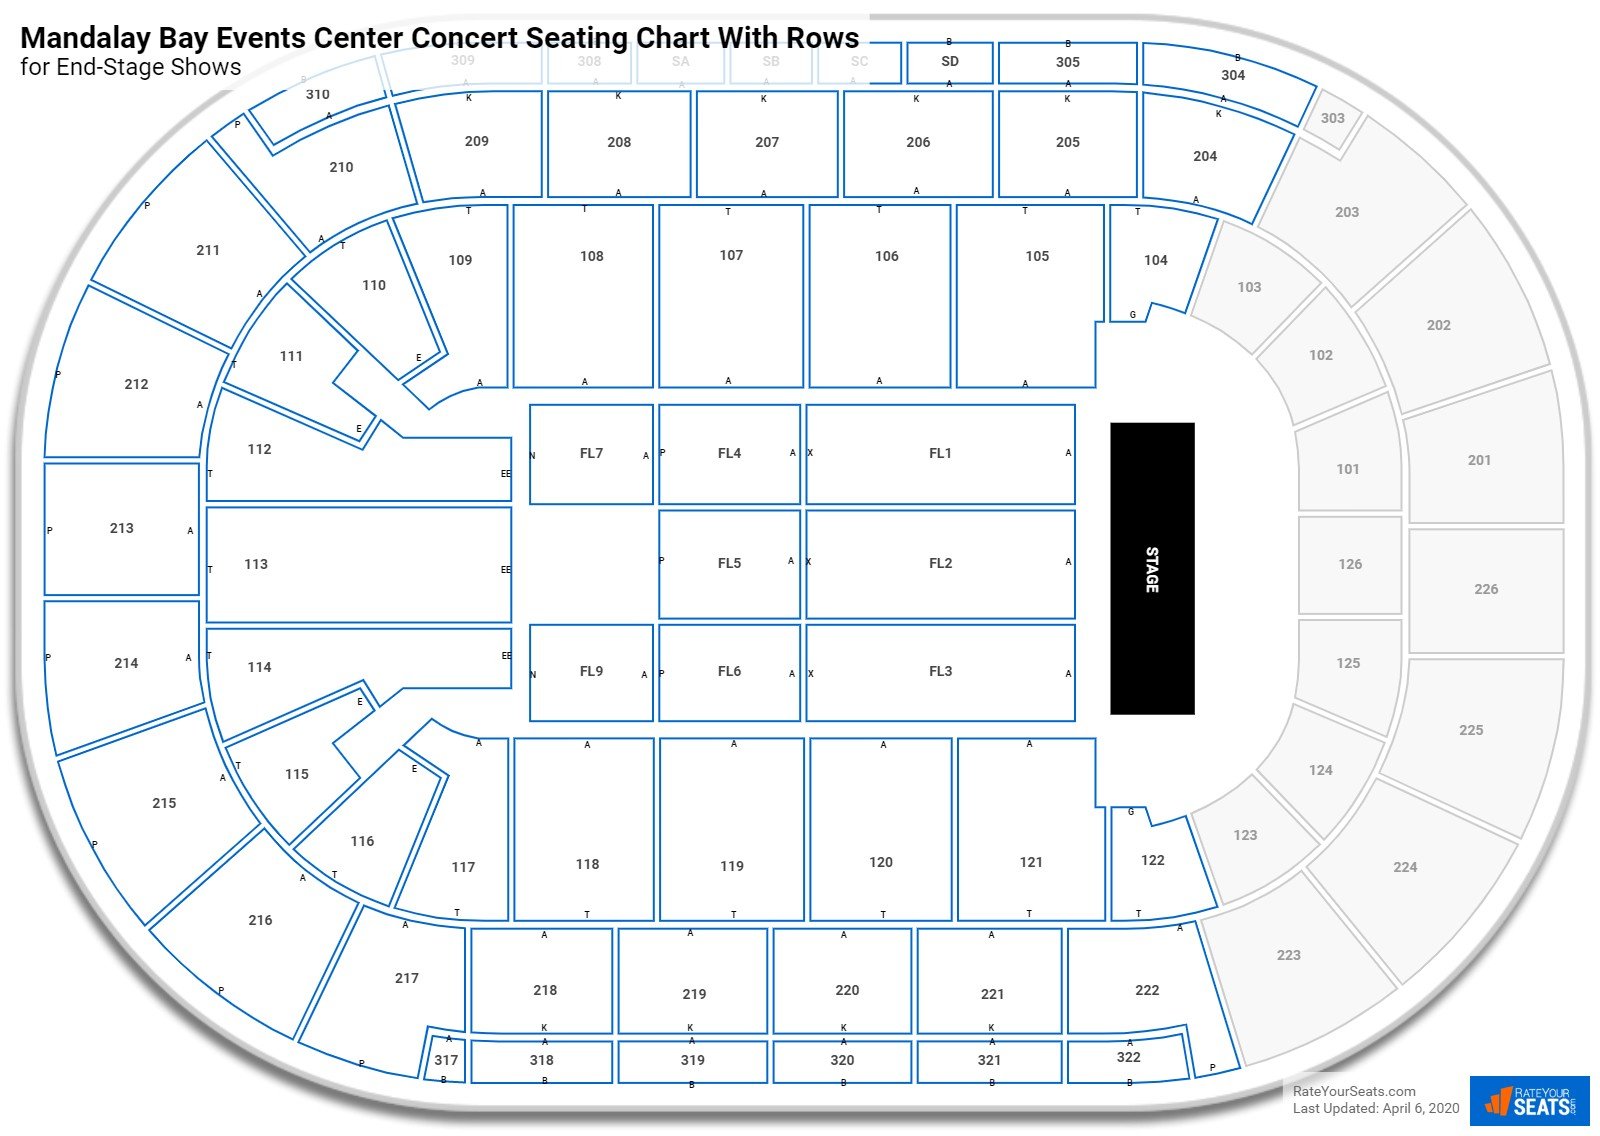 Michelob ULTRA Arena seating chart with row numbers